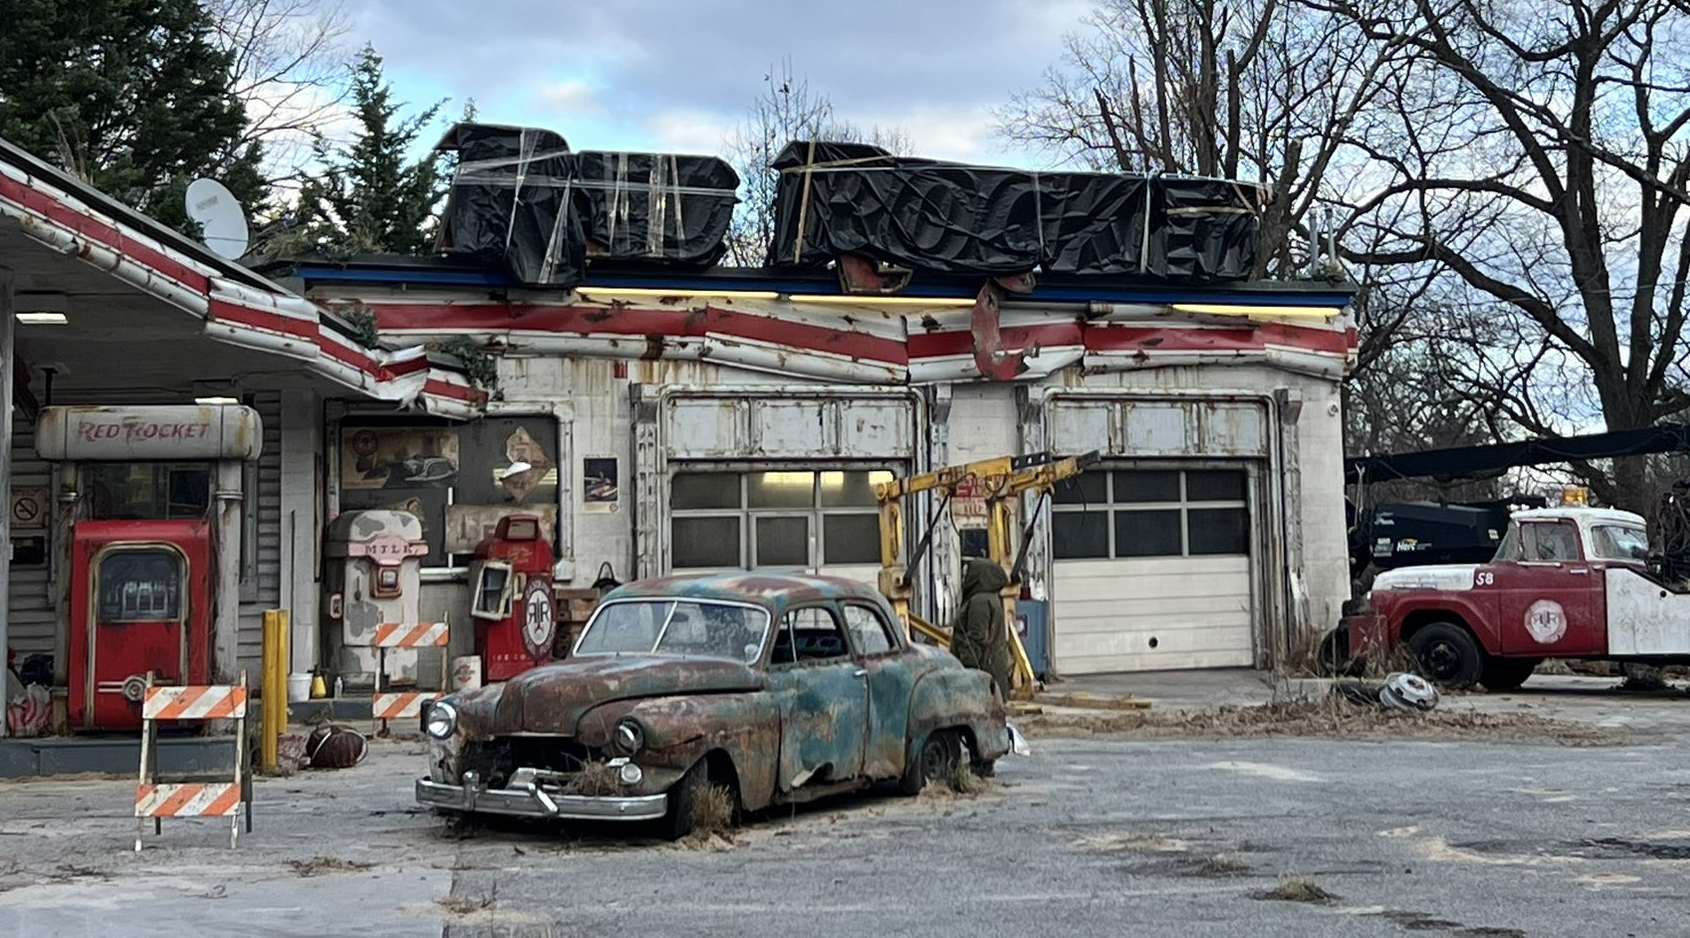 New Fallout TV series set show iconic Red Rocket gas station | PC Gamer